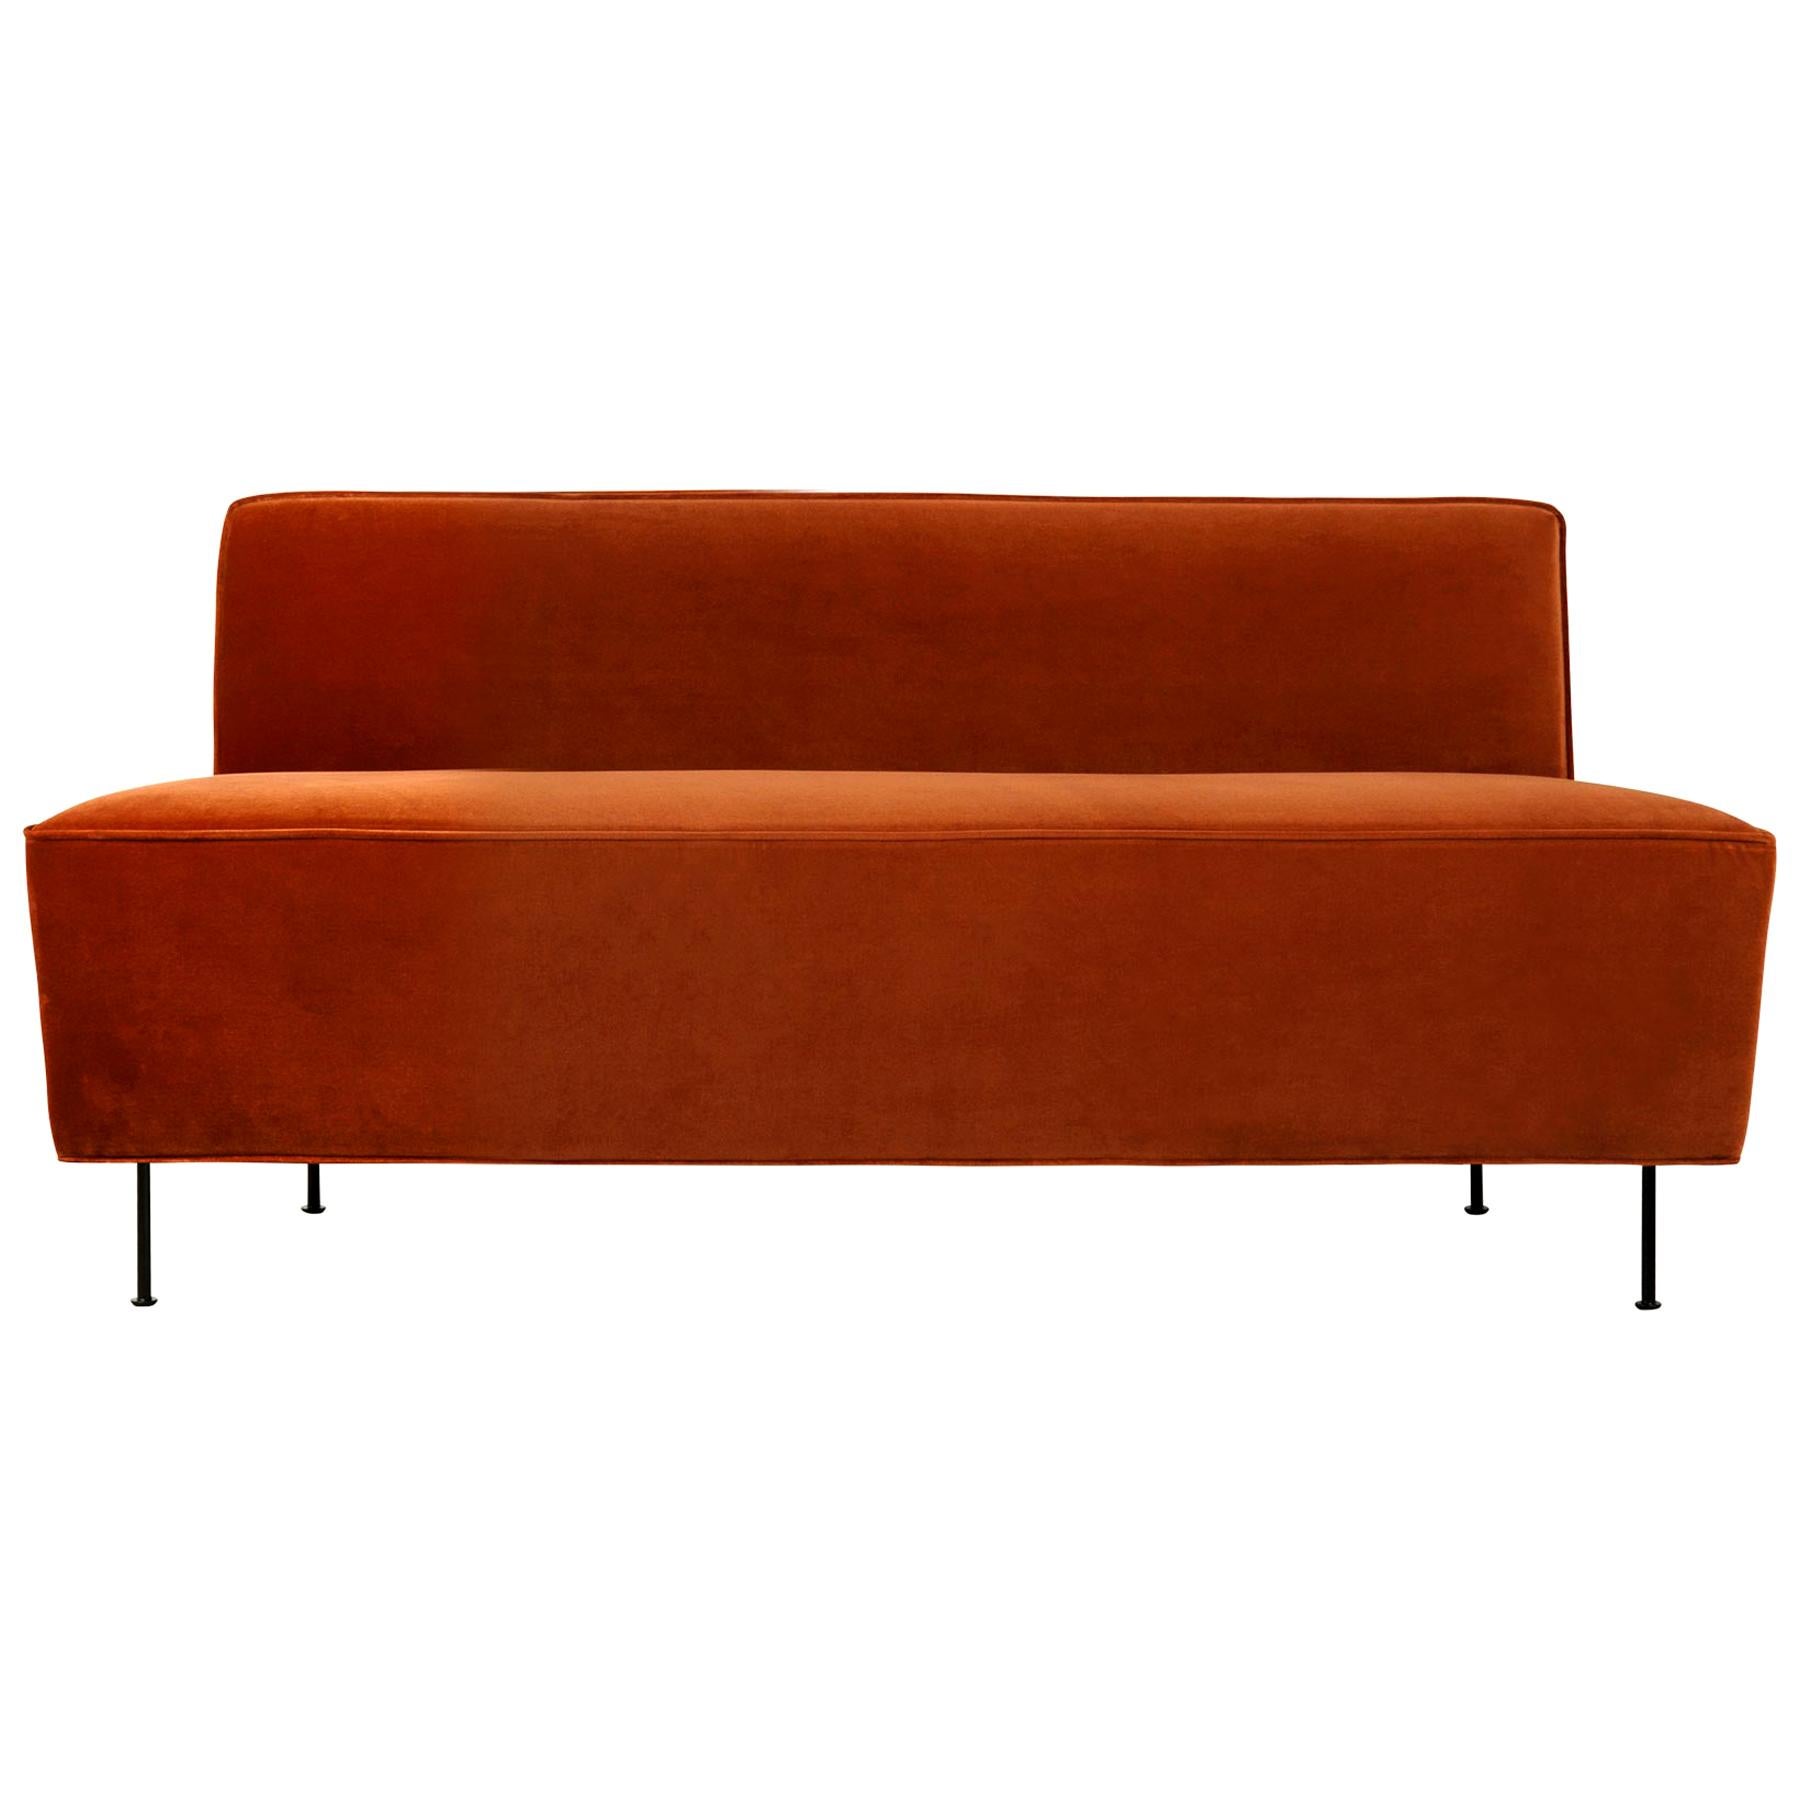 Modern Line Sofa, Dining Height, Small with Brass Legs